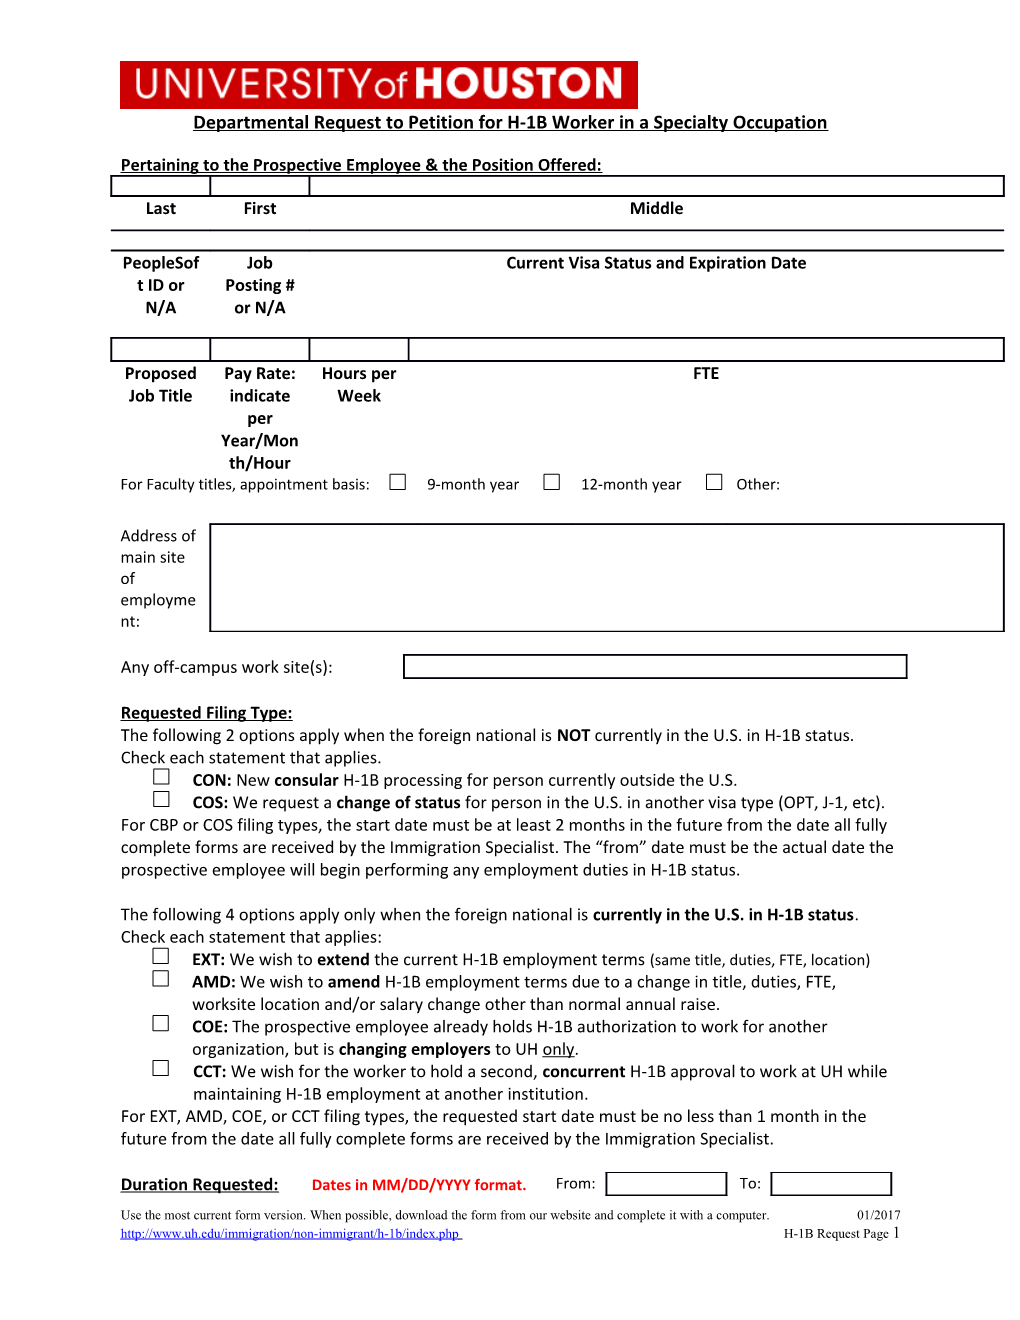 Departmental Request to Petition for H-1B Worker in a Specialty Occupation